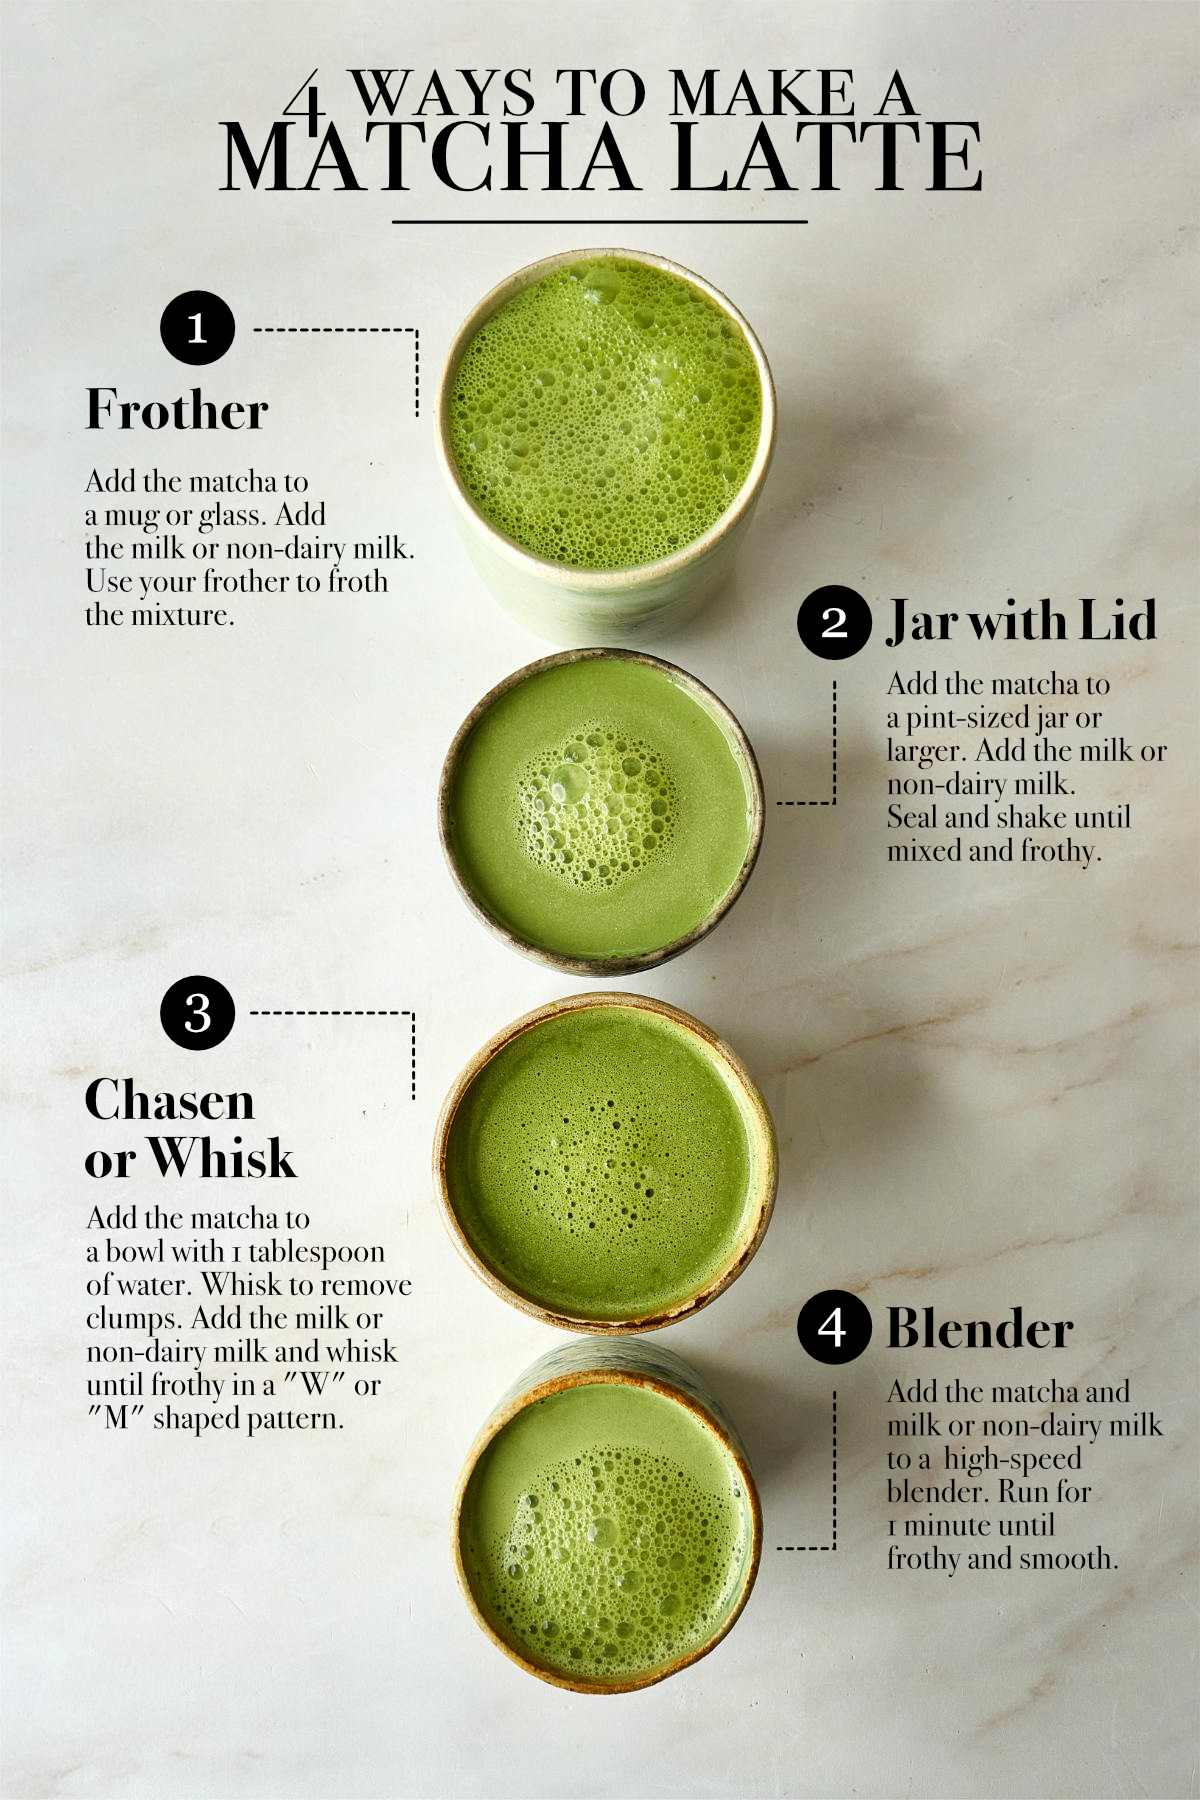 Frothing Matcha: Whisk vs. Electric Frother